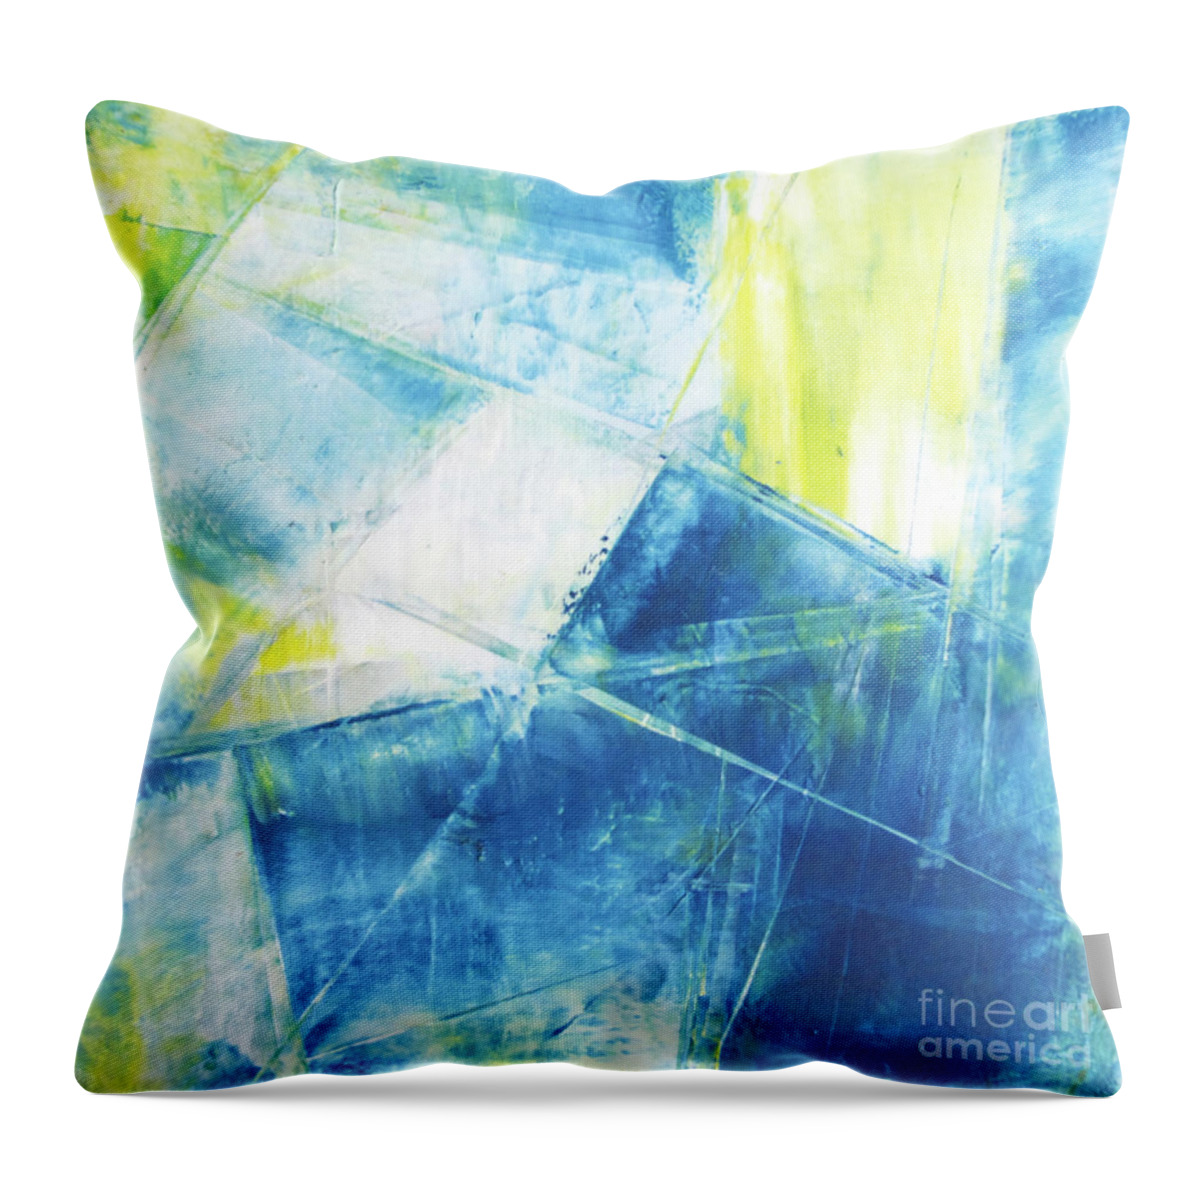 Oil Throw Pillow featuring the painting Blue Soul by Christine Chin-Fook